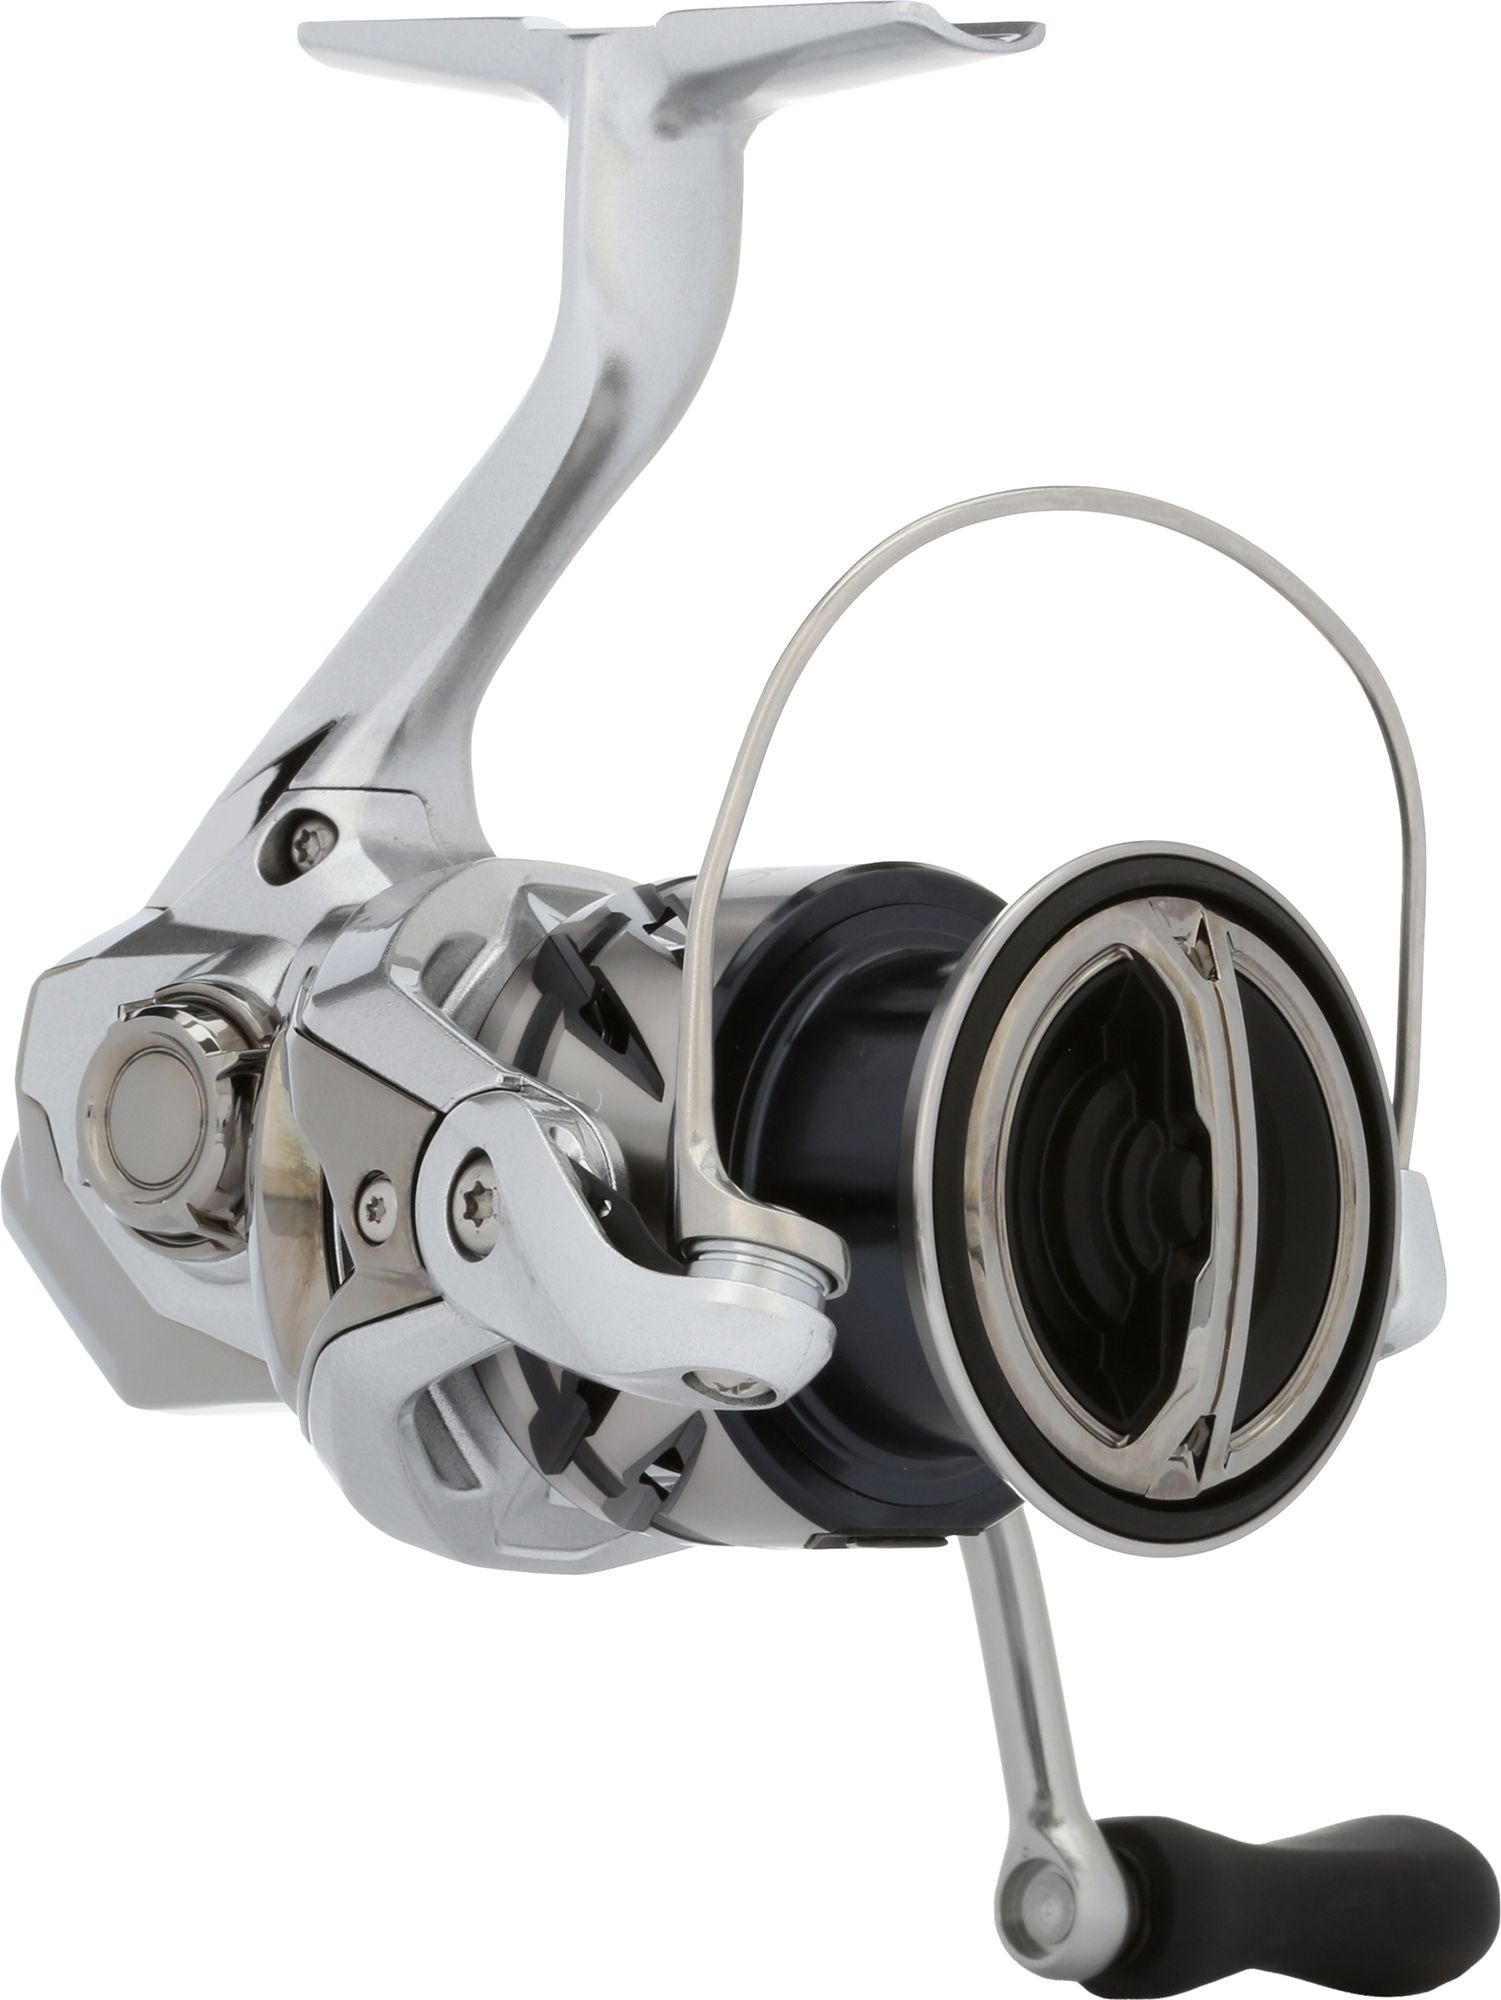 Photos - Other for Fishing Shimano Stradic FM Spinning Reel 23SHMUSTRDC1000HGREE 